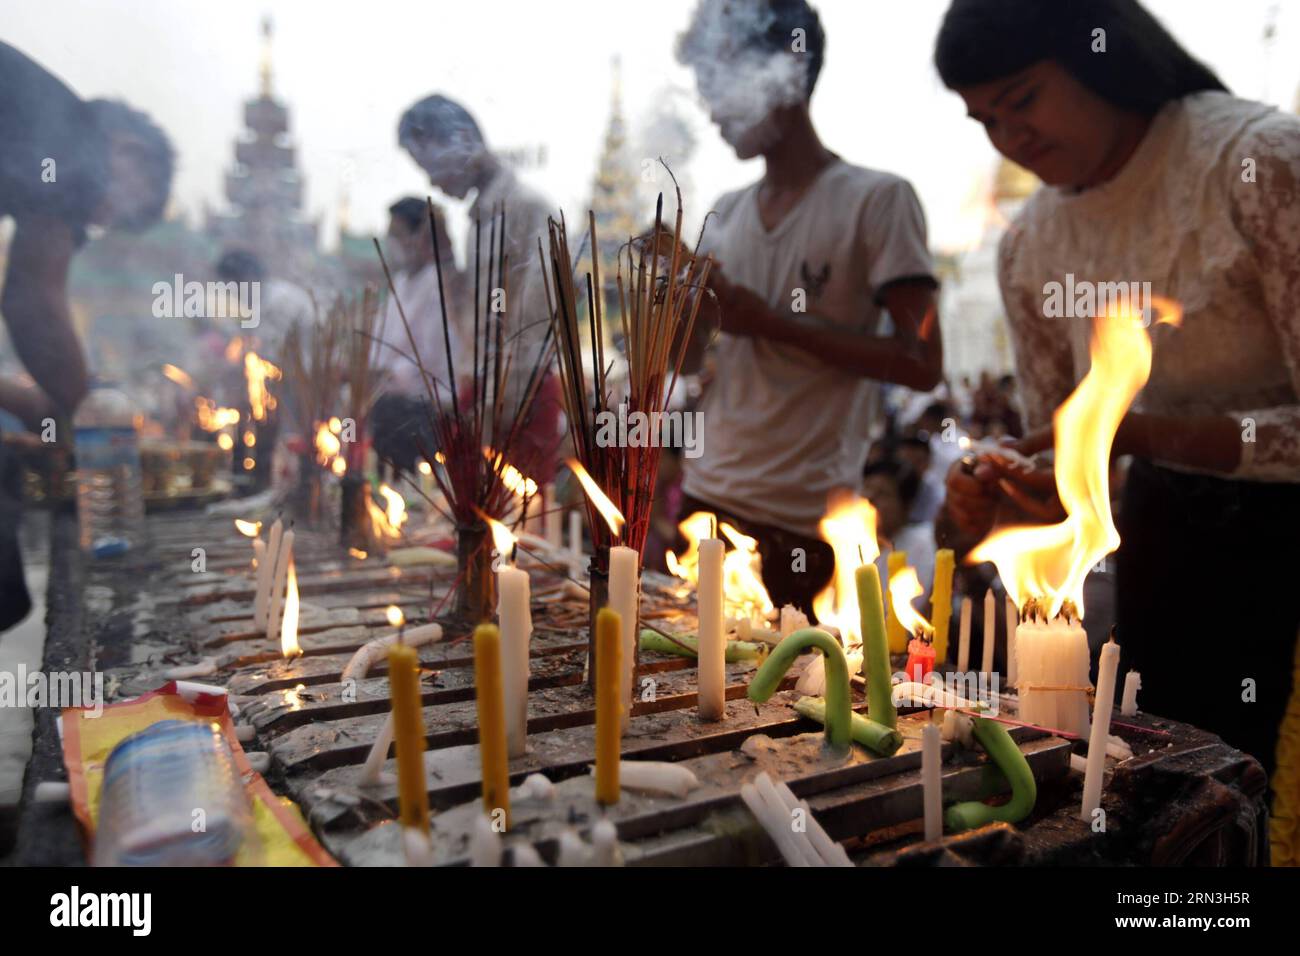 (150417) -- YANGON, April 17, 2015 -- People light candles and burn incense sticks to pray on the first day of Myanmar s new year at the world-famous Shwedagon Pagoda in Yangon, Myanmar, April 17, 2015. On the first day of Myanmar s new year, people in the country used to perform meritorious deeds and Buddhists, who account for the majority of the people, usually go to the pagodas, monasteries and meditation centers where they practice meditation. ) MYANMAR-YANGON-NEW YEAR UxAung PUBLICATIONxNOTxINxCHN   Yangon April 17 2015 Celebrities Light Candles and Burn incense Sticks to Pray ON The Firs Stock Photo